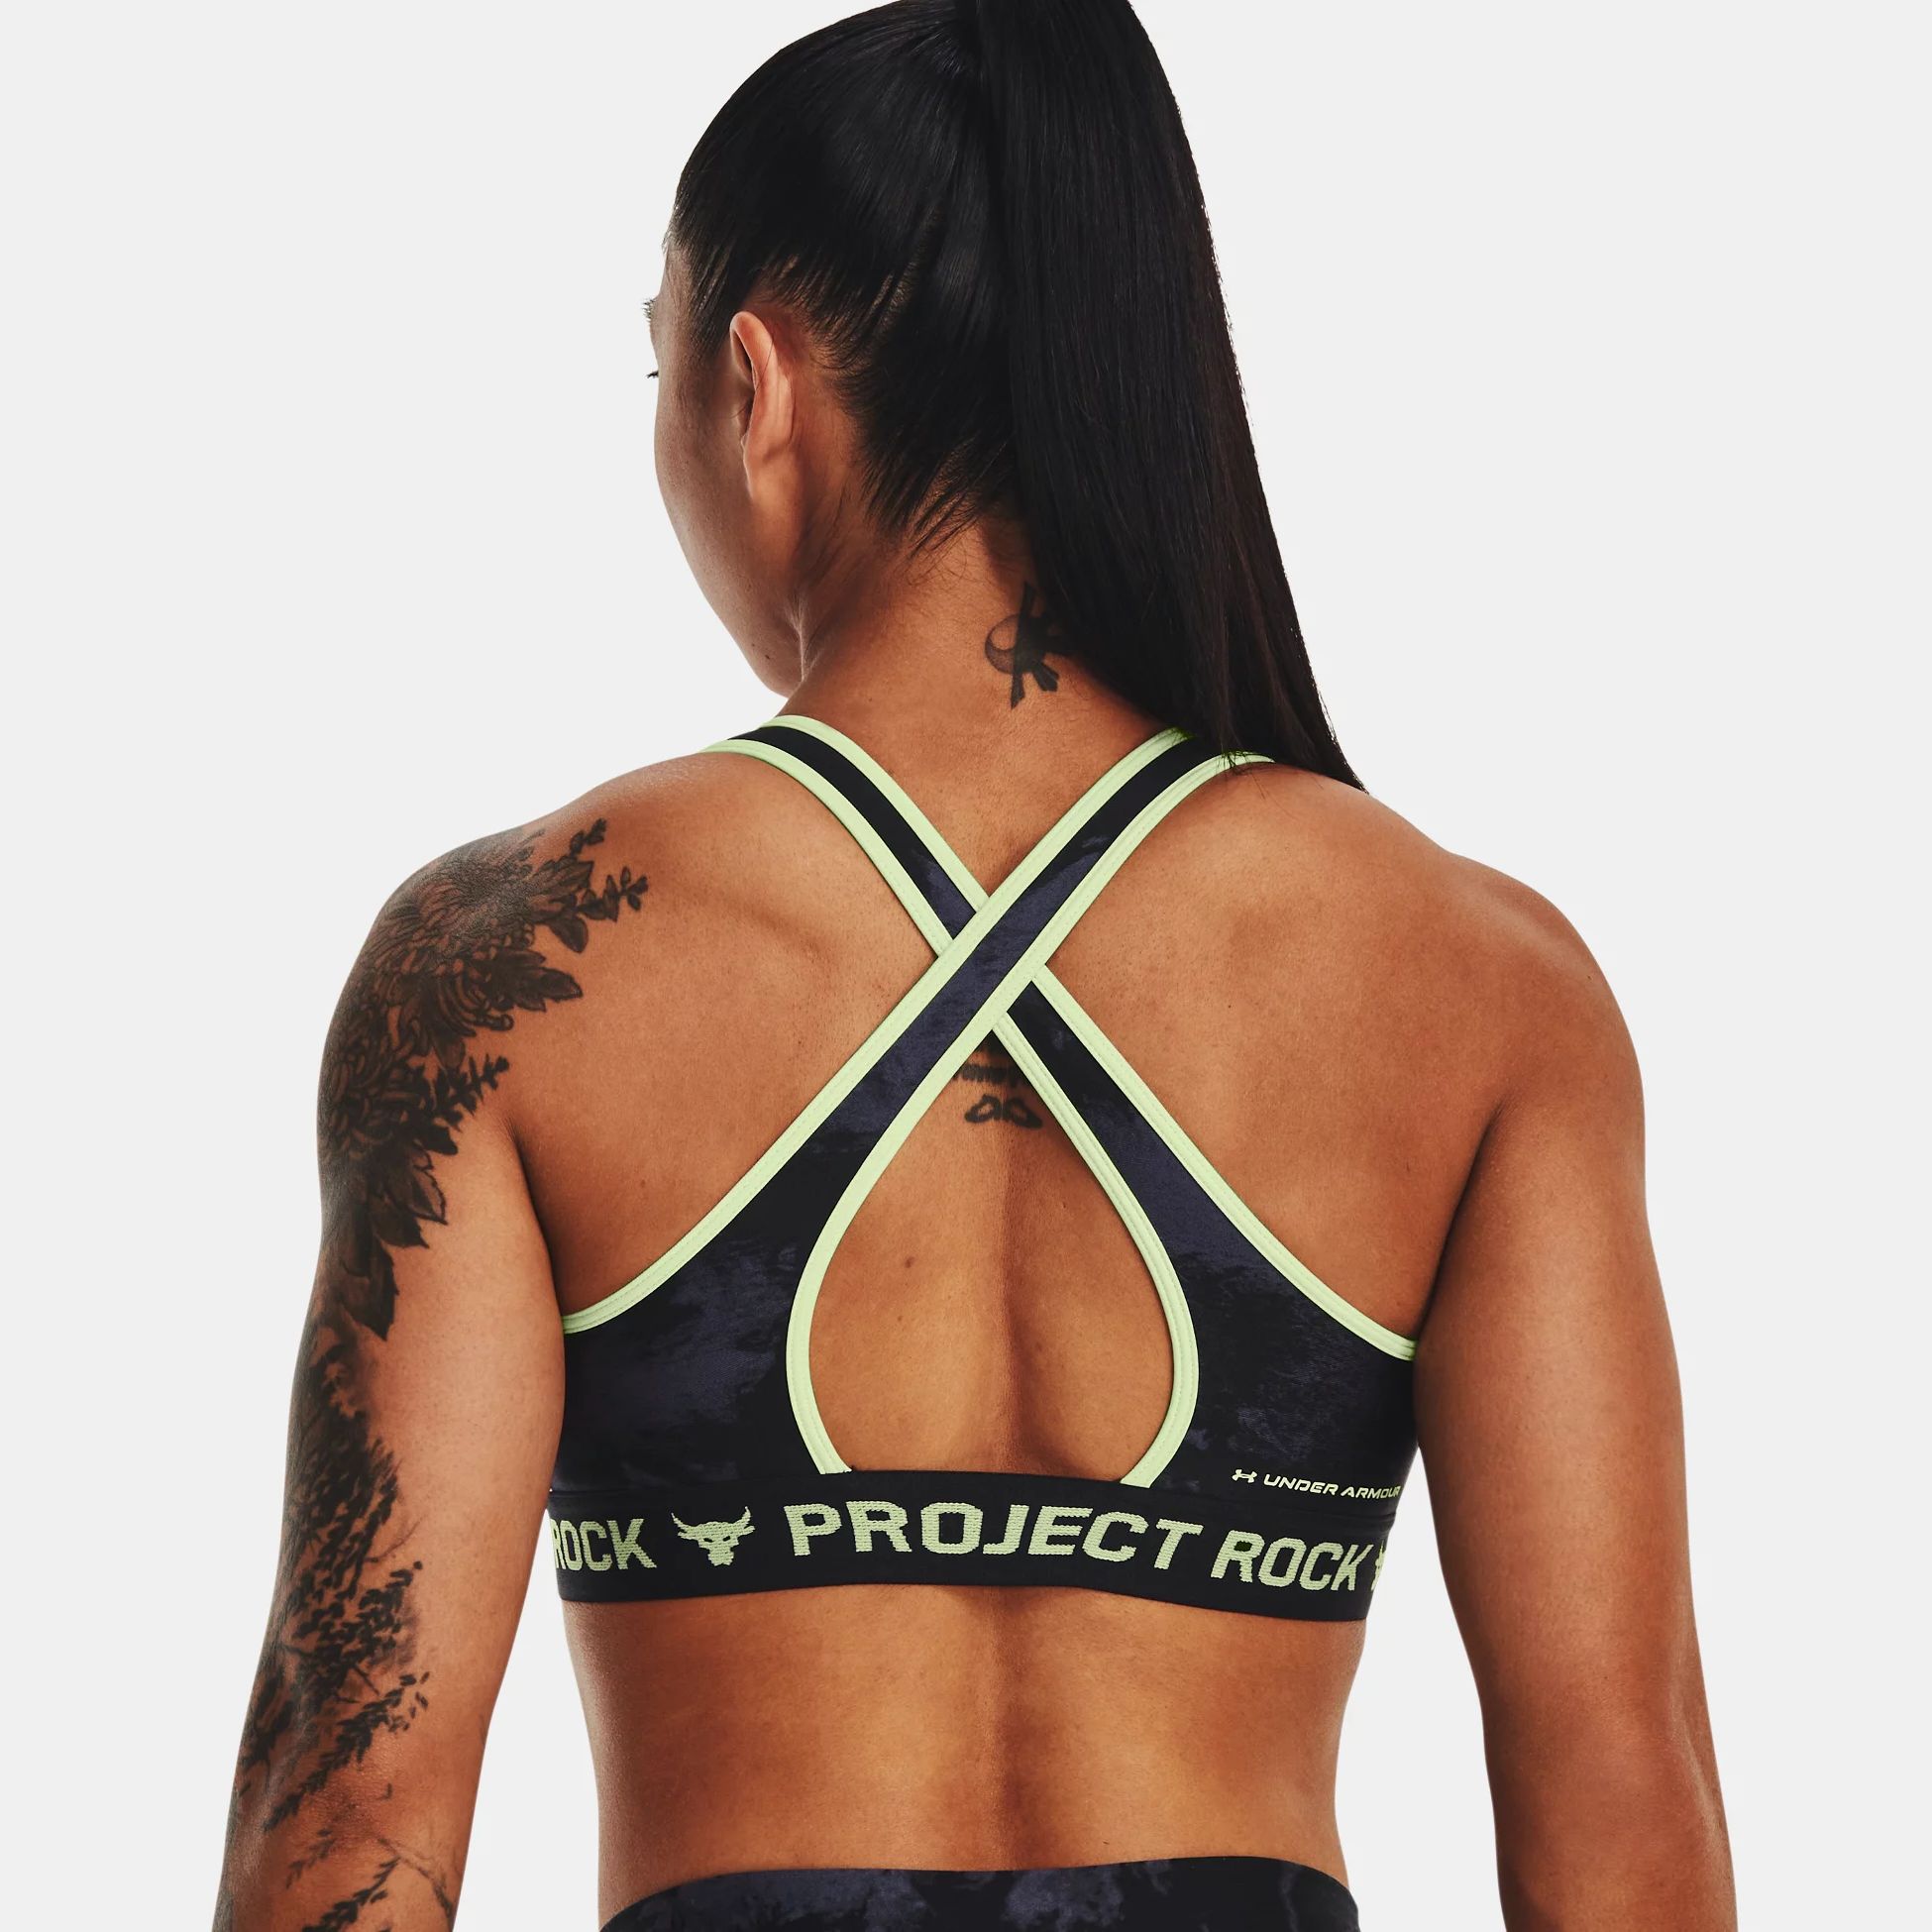 https://img1.sportconcept.com/backend_nou/content/images/fitness-under-armour%20project-rock-crossback-printed-sports-bra-20220909152434.jpg